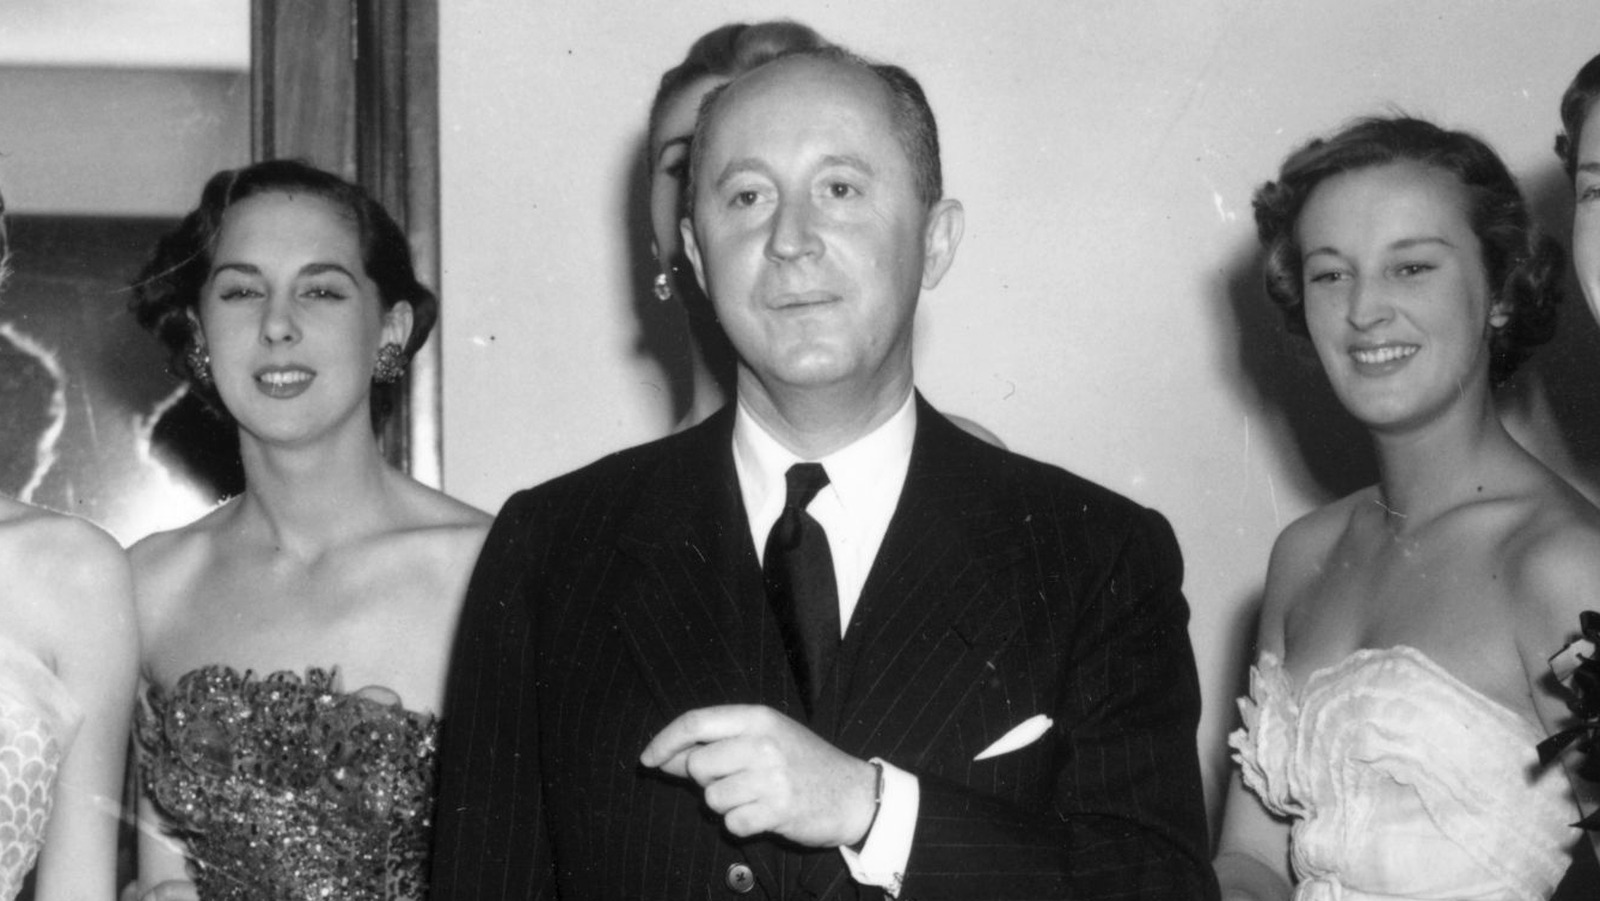 Christian Dior Created Beautiful Fashion. He Also Knew How to Sell It.